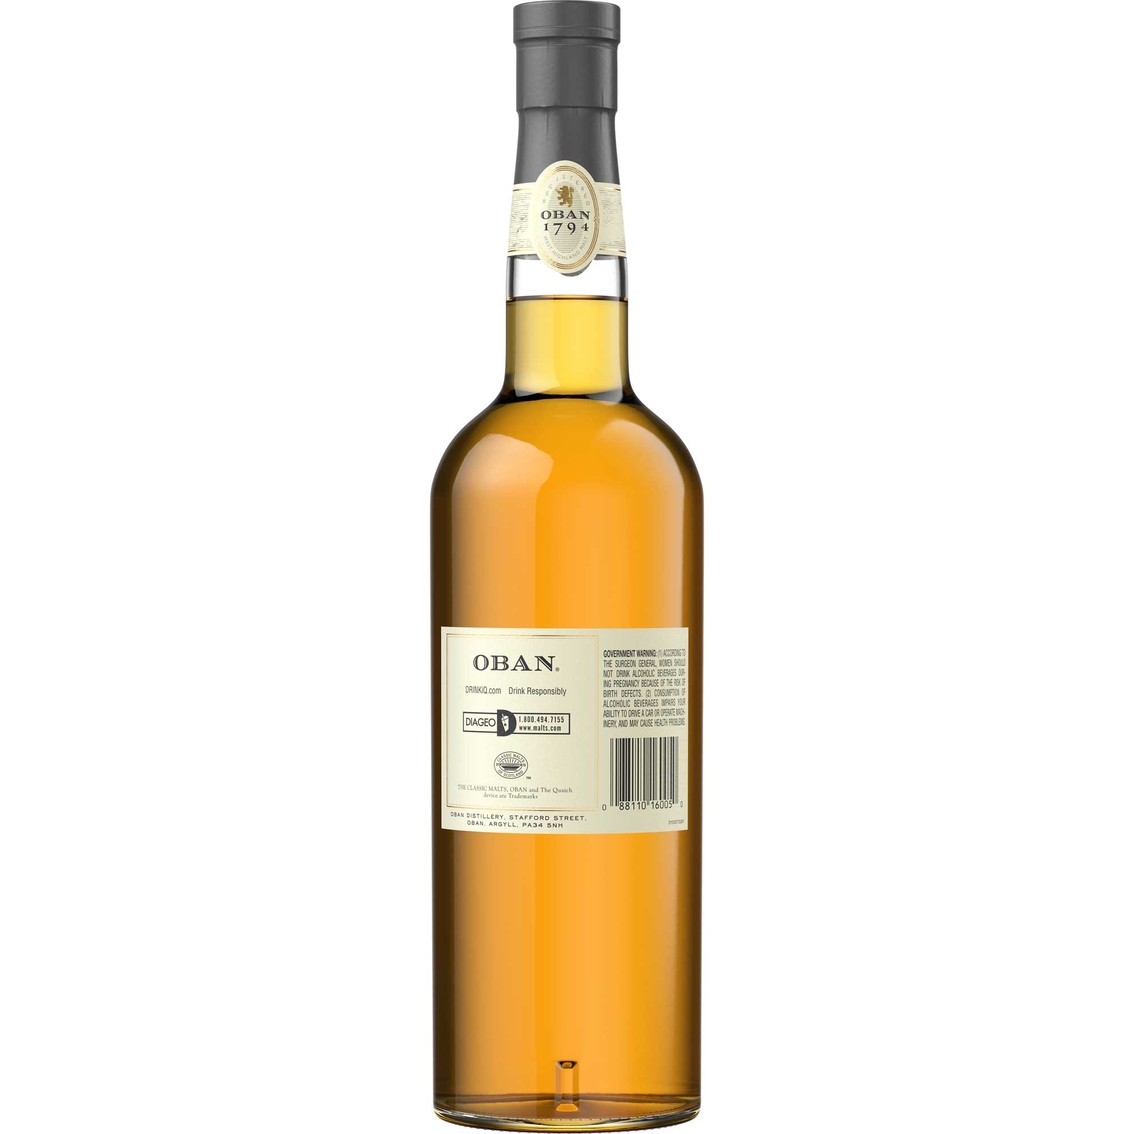 Oban 14 Year Old Scotch Whisky 750ml - Image 2 of 2